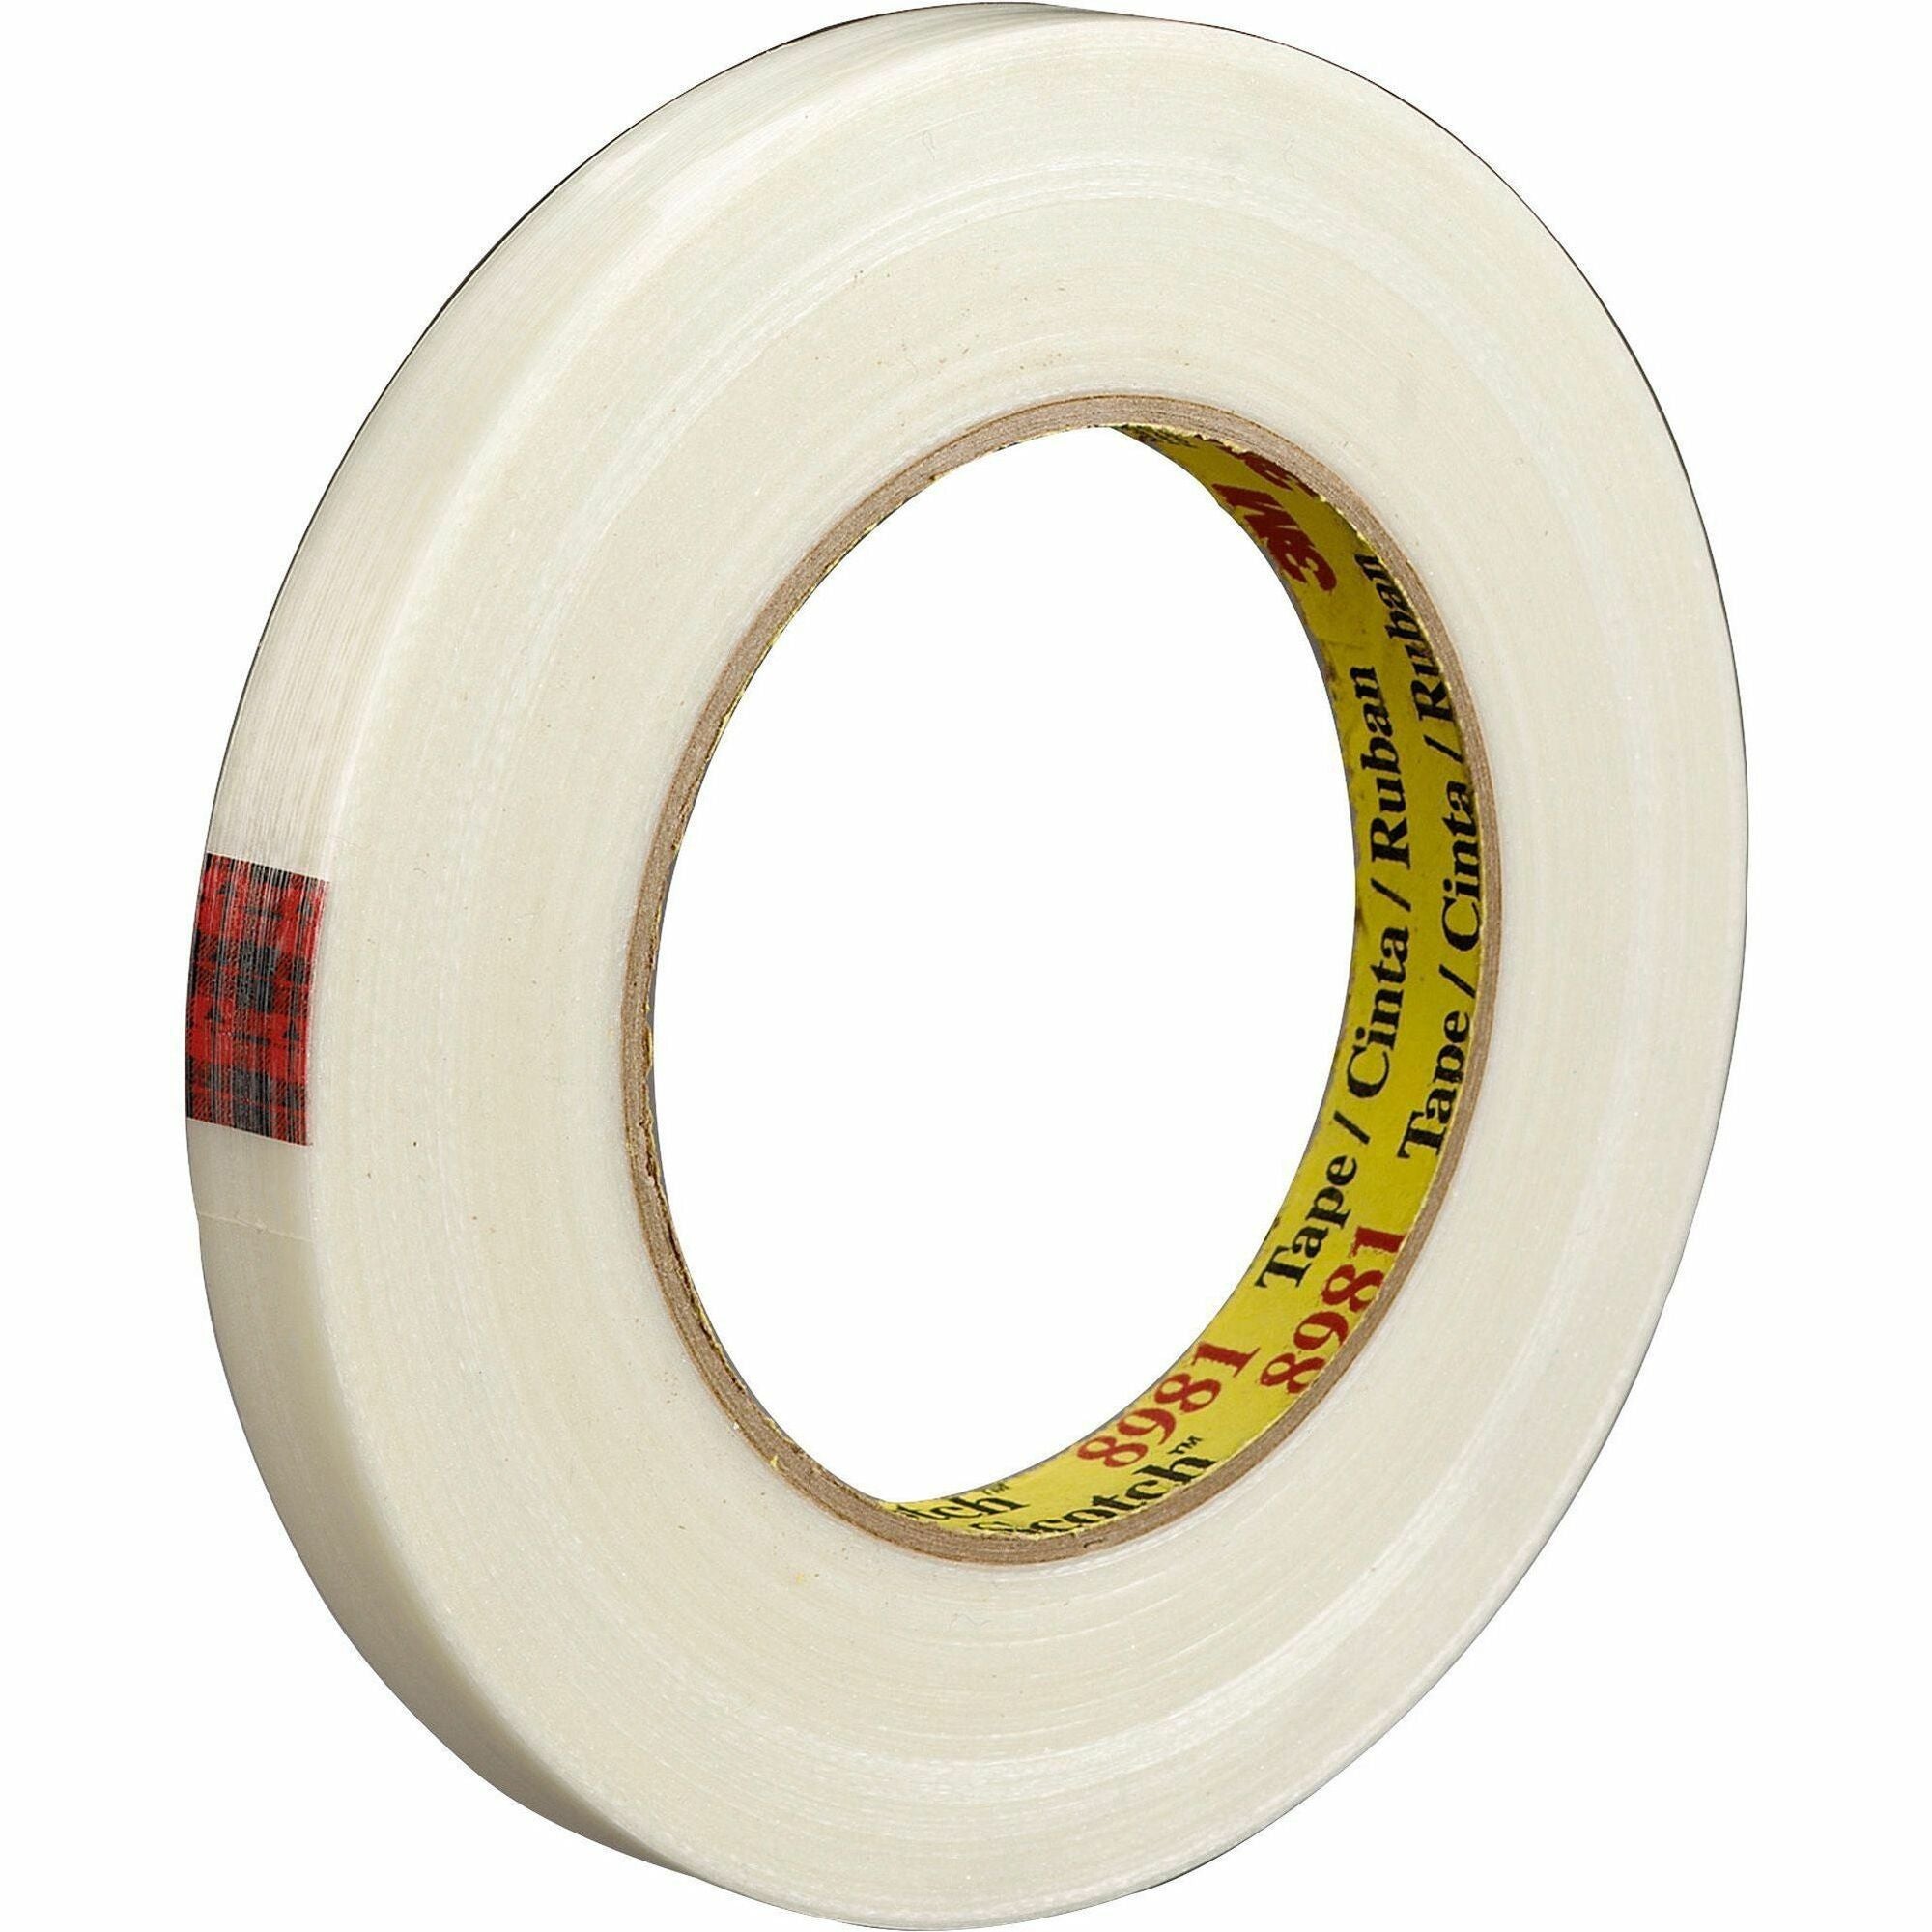 Scotch Premium-Grade Filament Tape - 60 yd Length x 0.75" Width - 6.6 mil Thickness - 3" Core - Synthetic Rubber - Glass Yarn Backing - Abrasion Resistant, Moisture Resistant, Curl Resistant - For Reinforcing, Banding - 1 / Roll - Clear - 